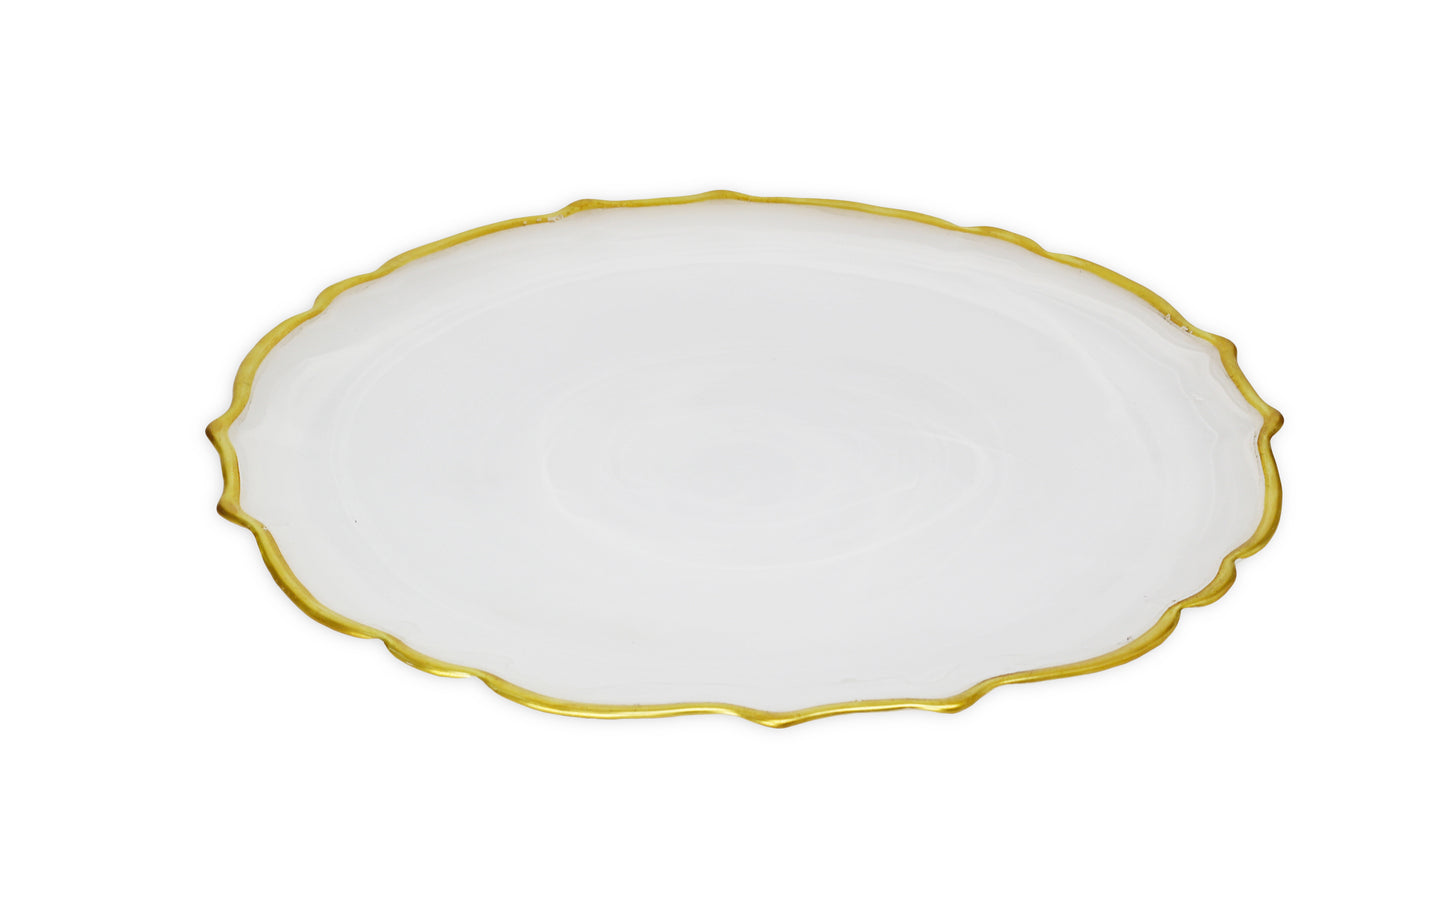 Alabaster White Dinner Plates with Gold Trim, Set of 4